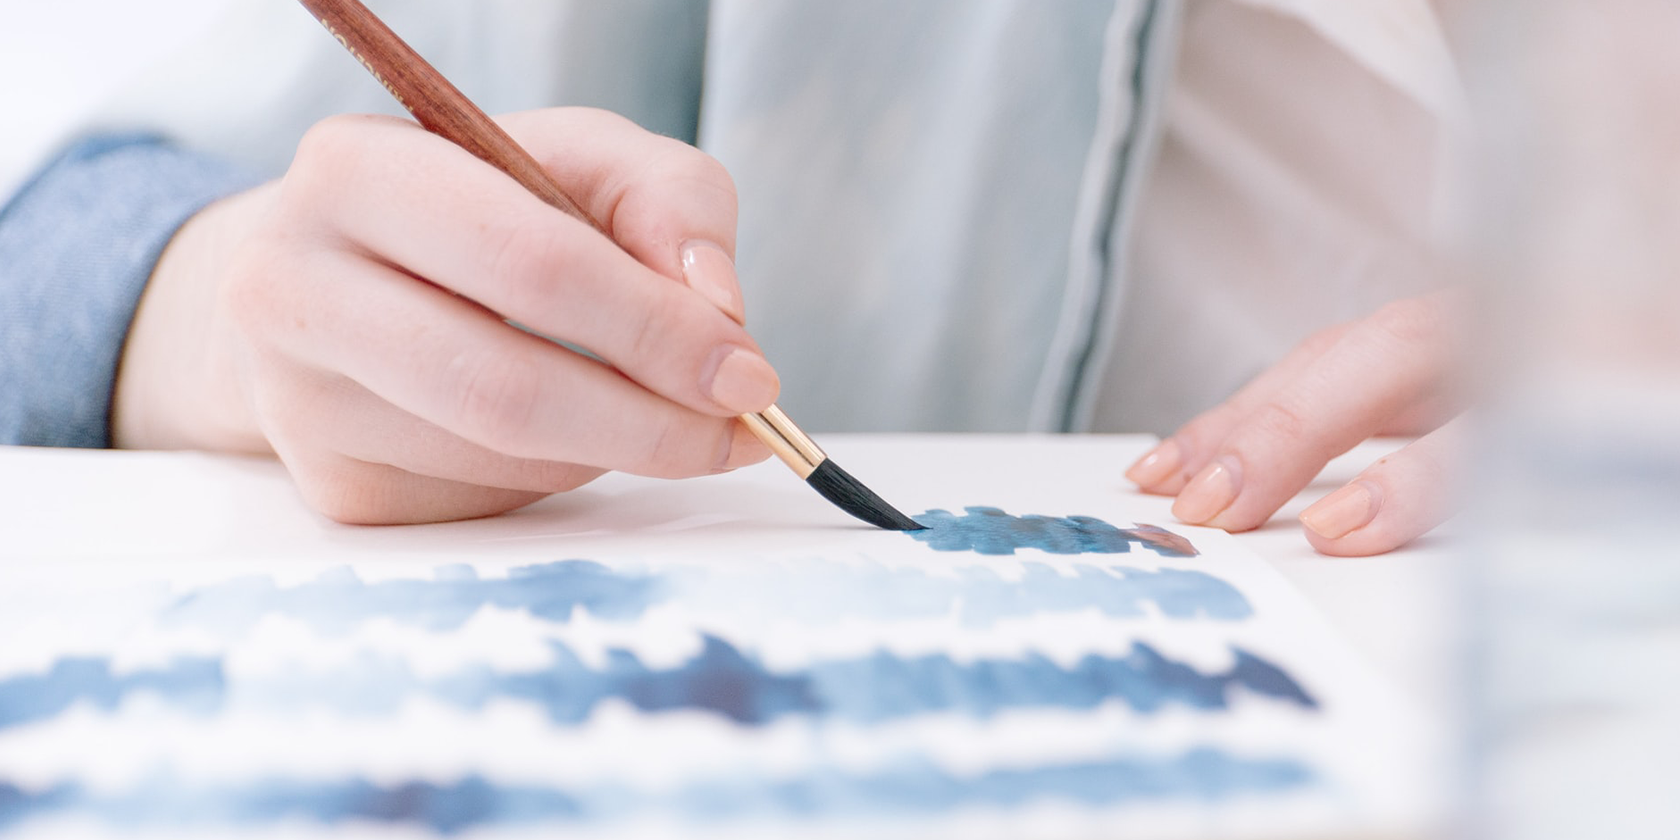 An artist strokes with blue watercolor paints